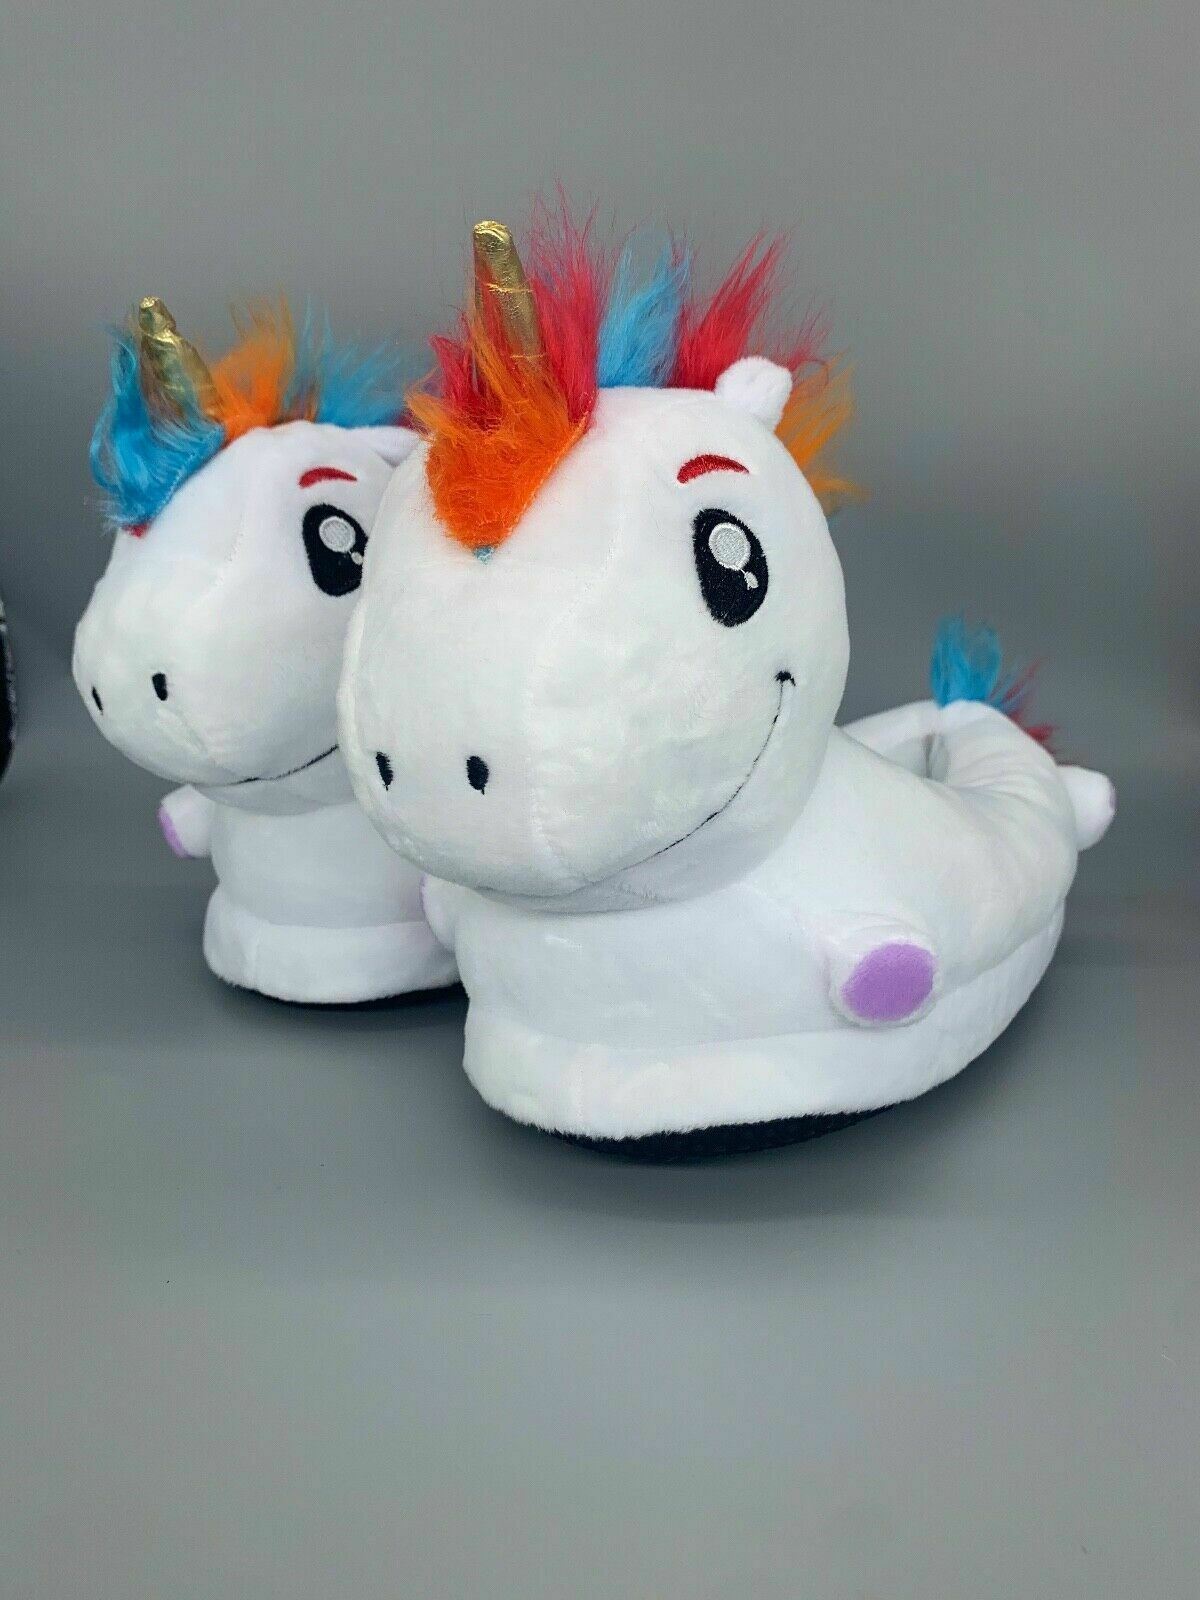 Unicorn Slippers Light up Kids Plush White Slippers One Size approx (3 - 11)